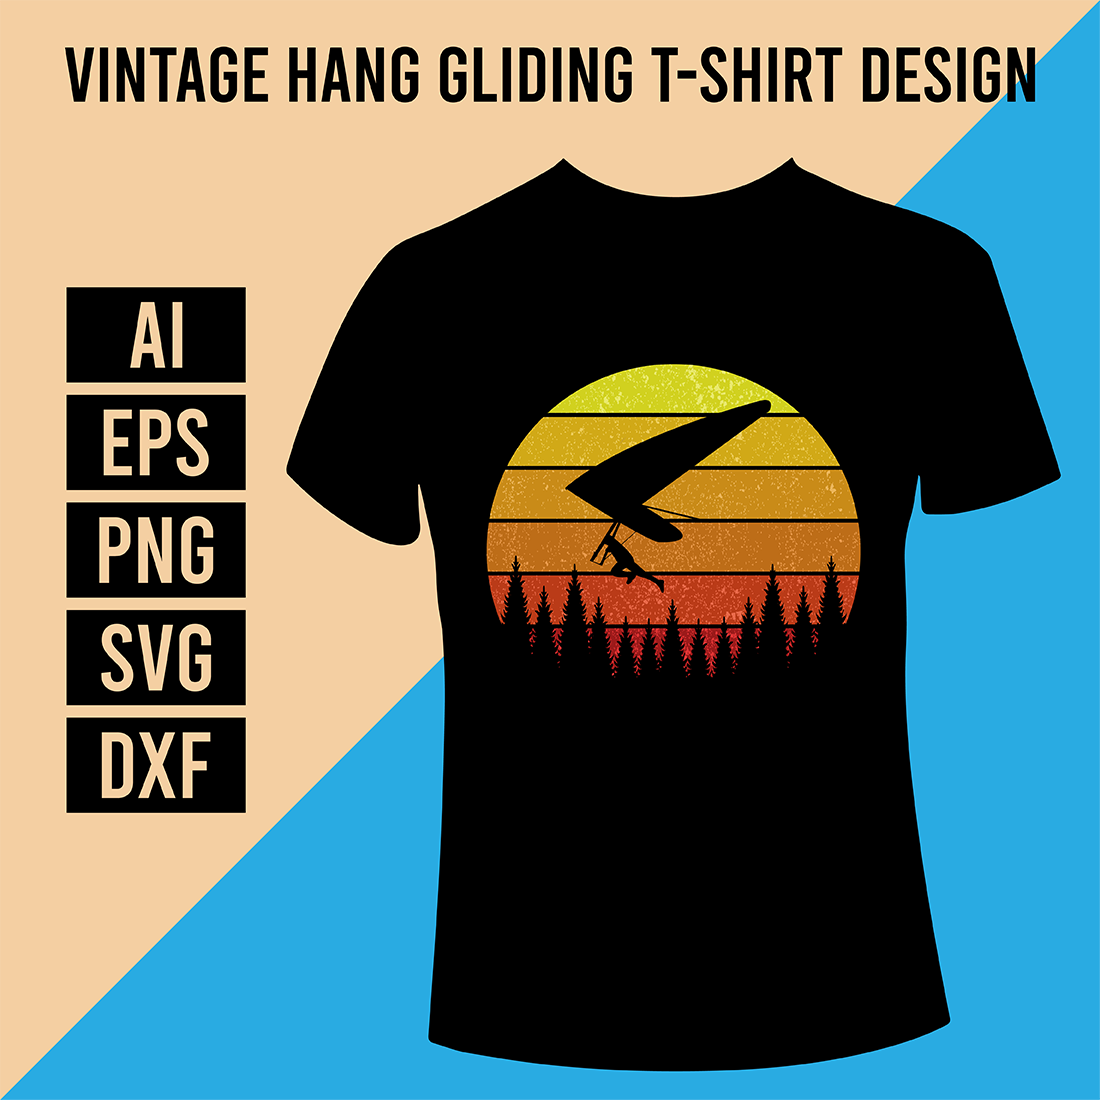 T - shirt design with a bird flying over a sunset.